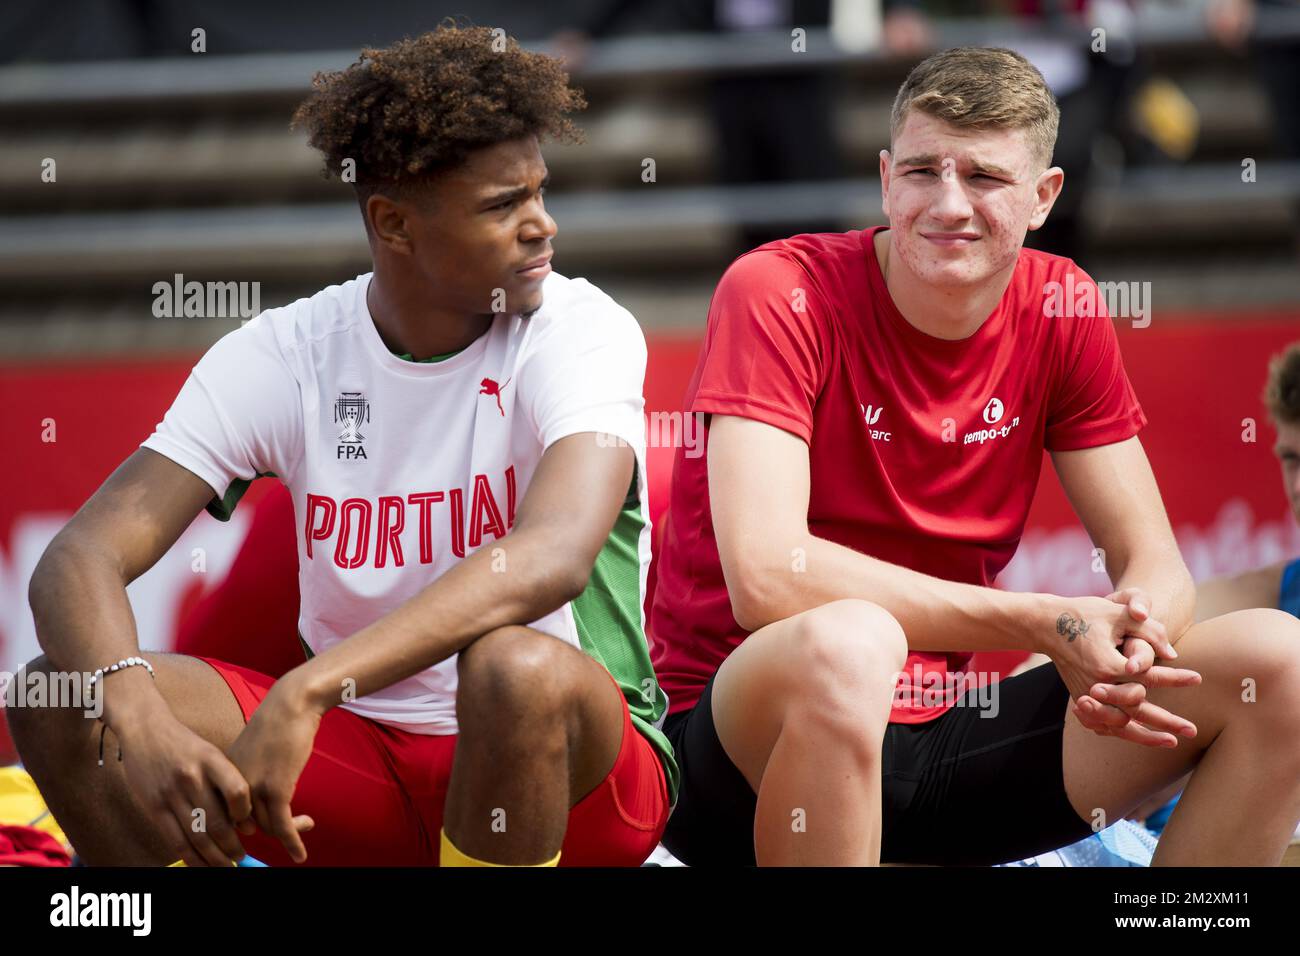 Belgian Thomas Carmoy (R) pictured during the men's high jump competition on day two of the European Athletics U20 Championships, Friday 19 July 2019 in Boras, Sweden. BELGA PHOTO JASPER JACOBS Stock Photo